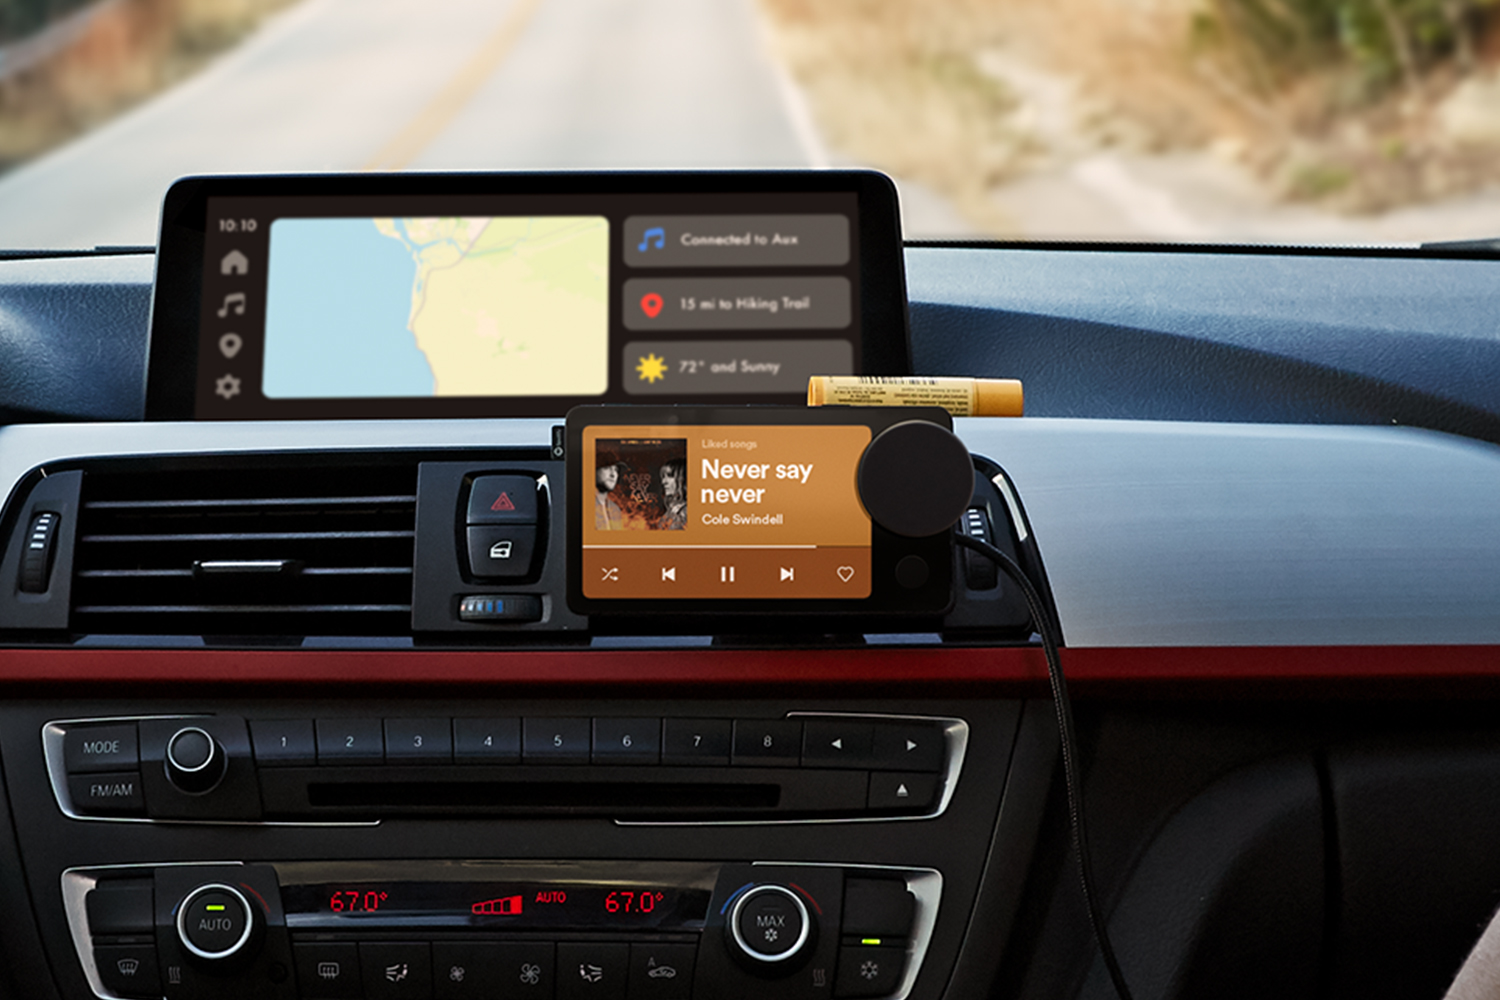 Review: The Spotify Car Thing Is a Fun Little Device With One Big Blind Spot